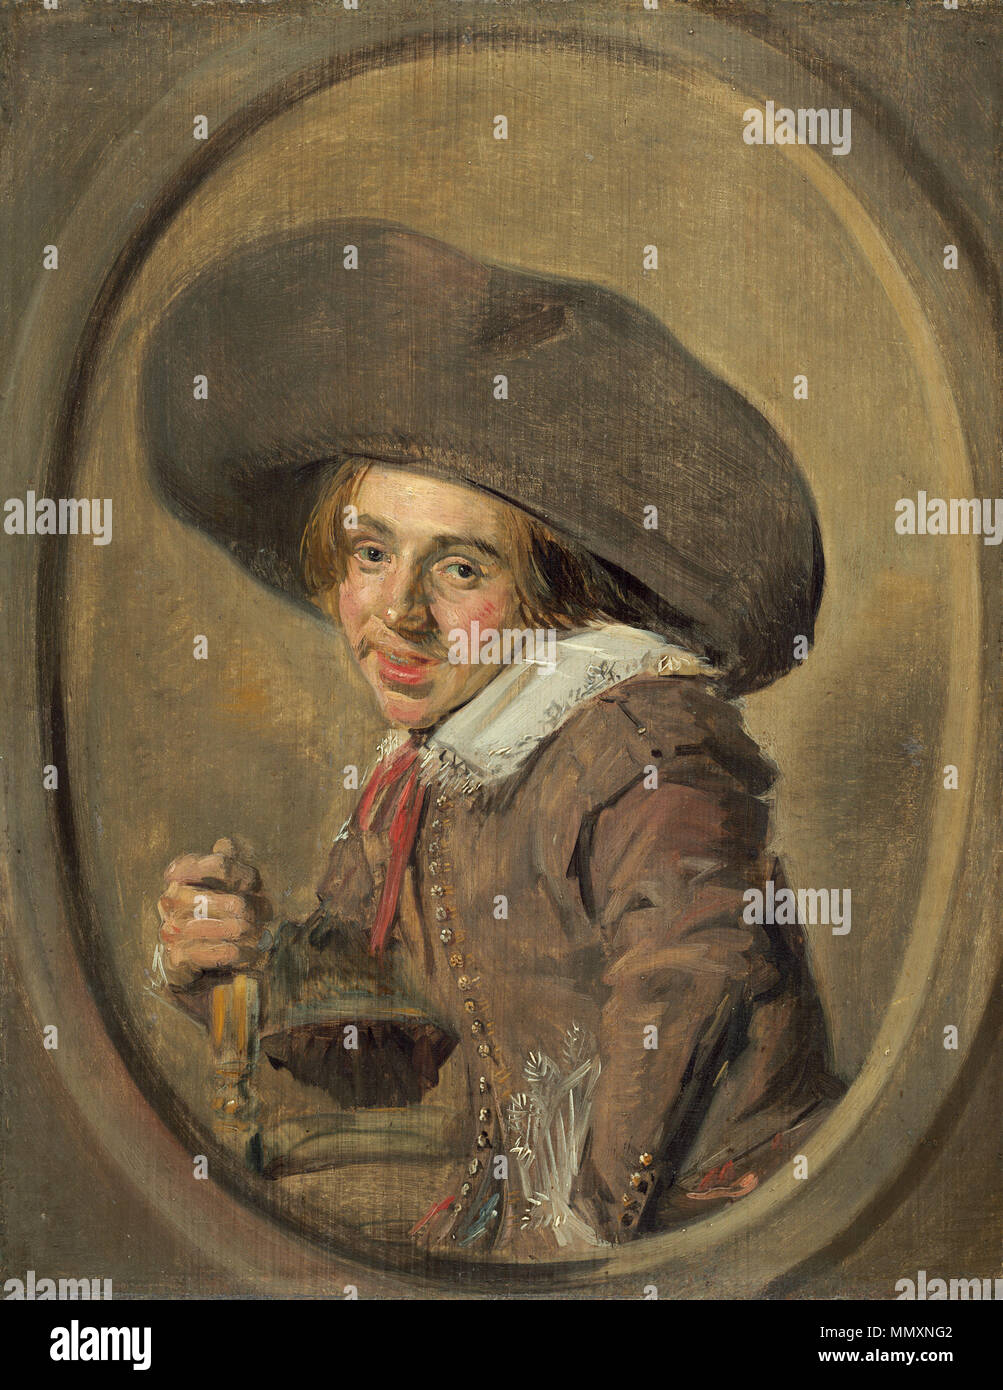 Painting; oil on panel; overall: 29.3 x 23.2 cm (11 9/16 x 9 1/8 in.) framed: 46.7 x 40.6 x 5.7 cm (18 3/8 x 16 x 2 1/4 in.); Frans Hals 094 WGA version Stock Photo